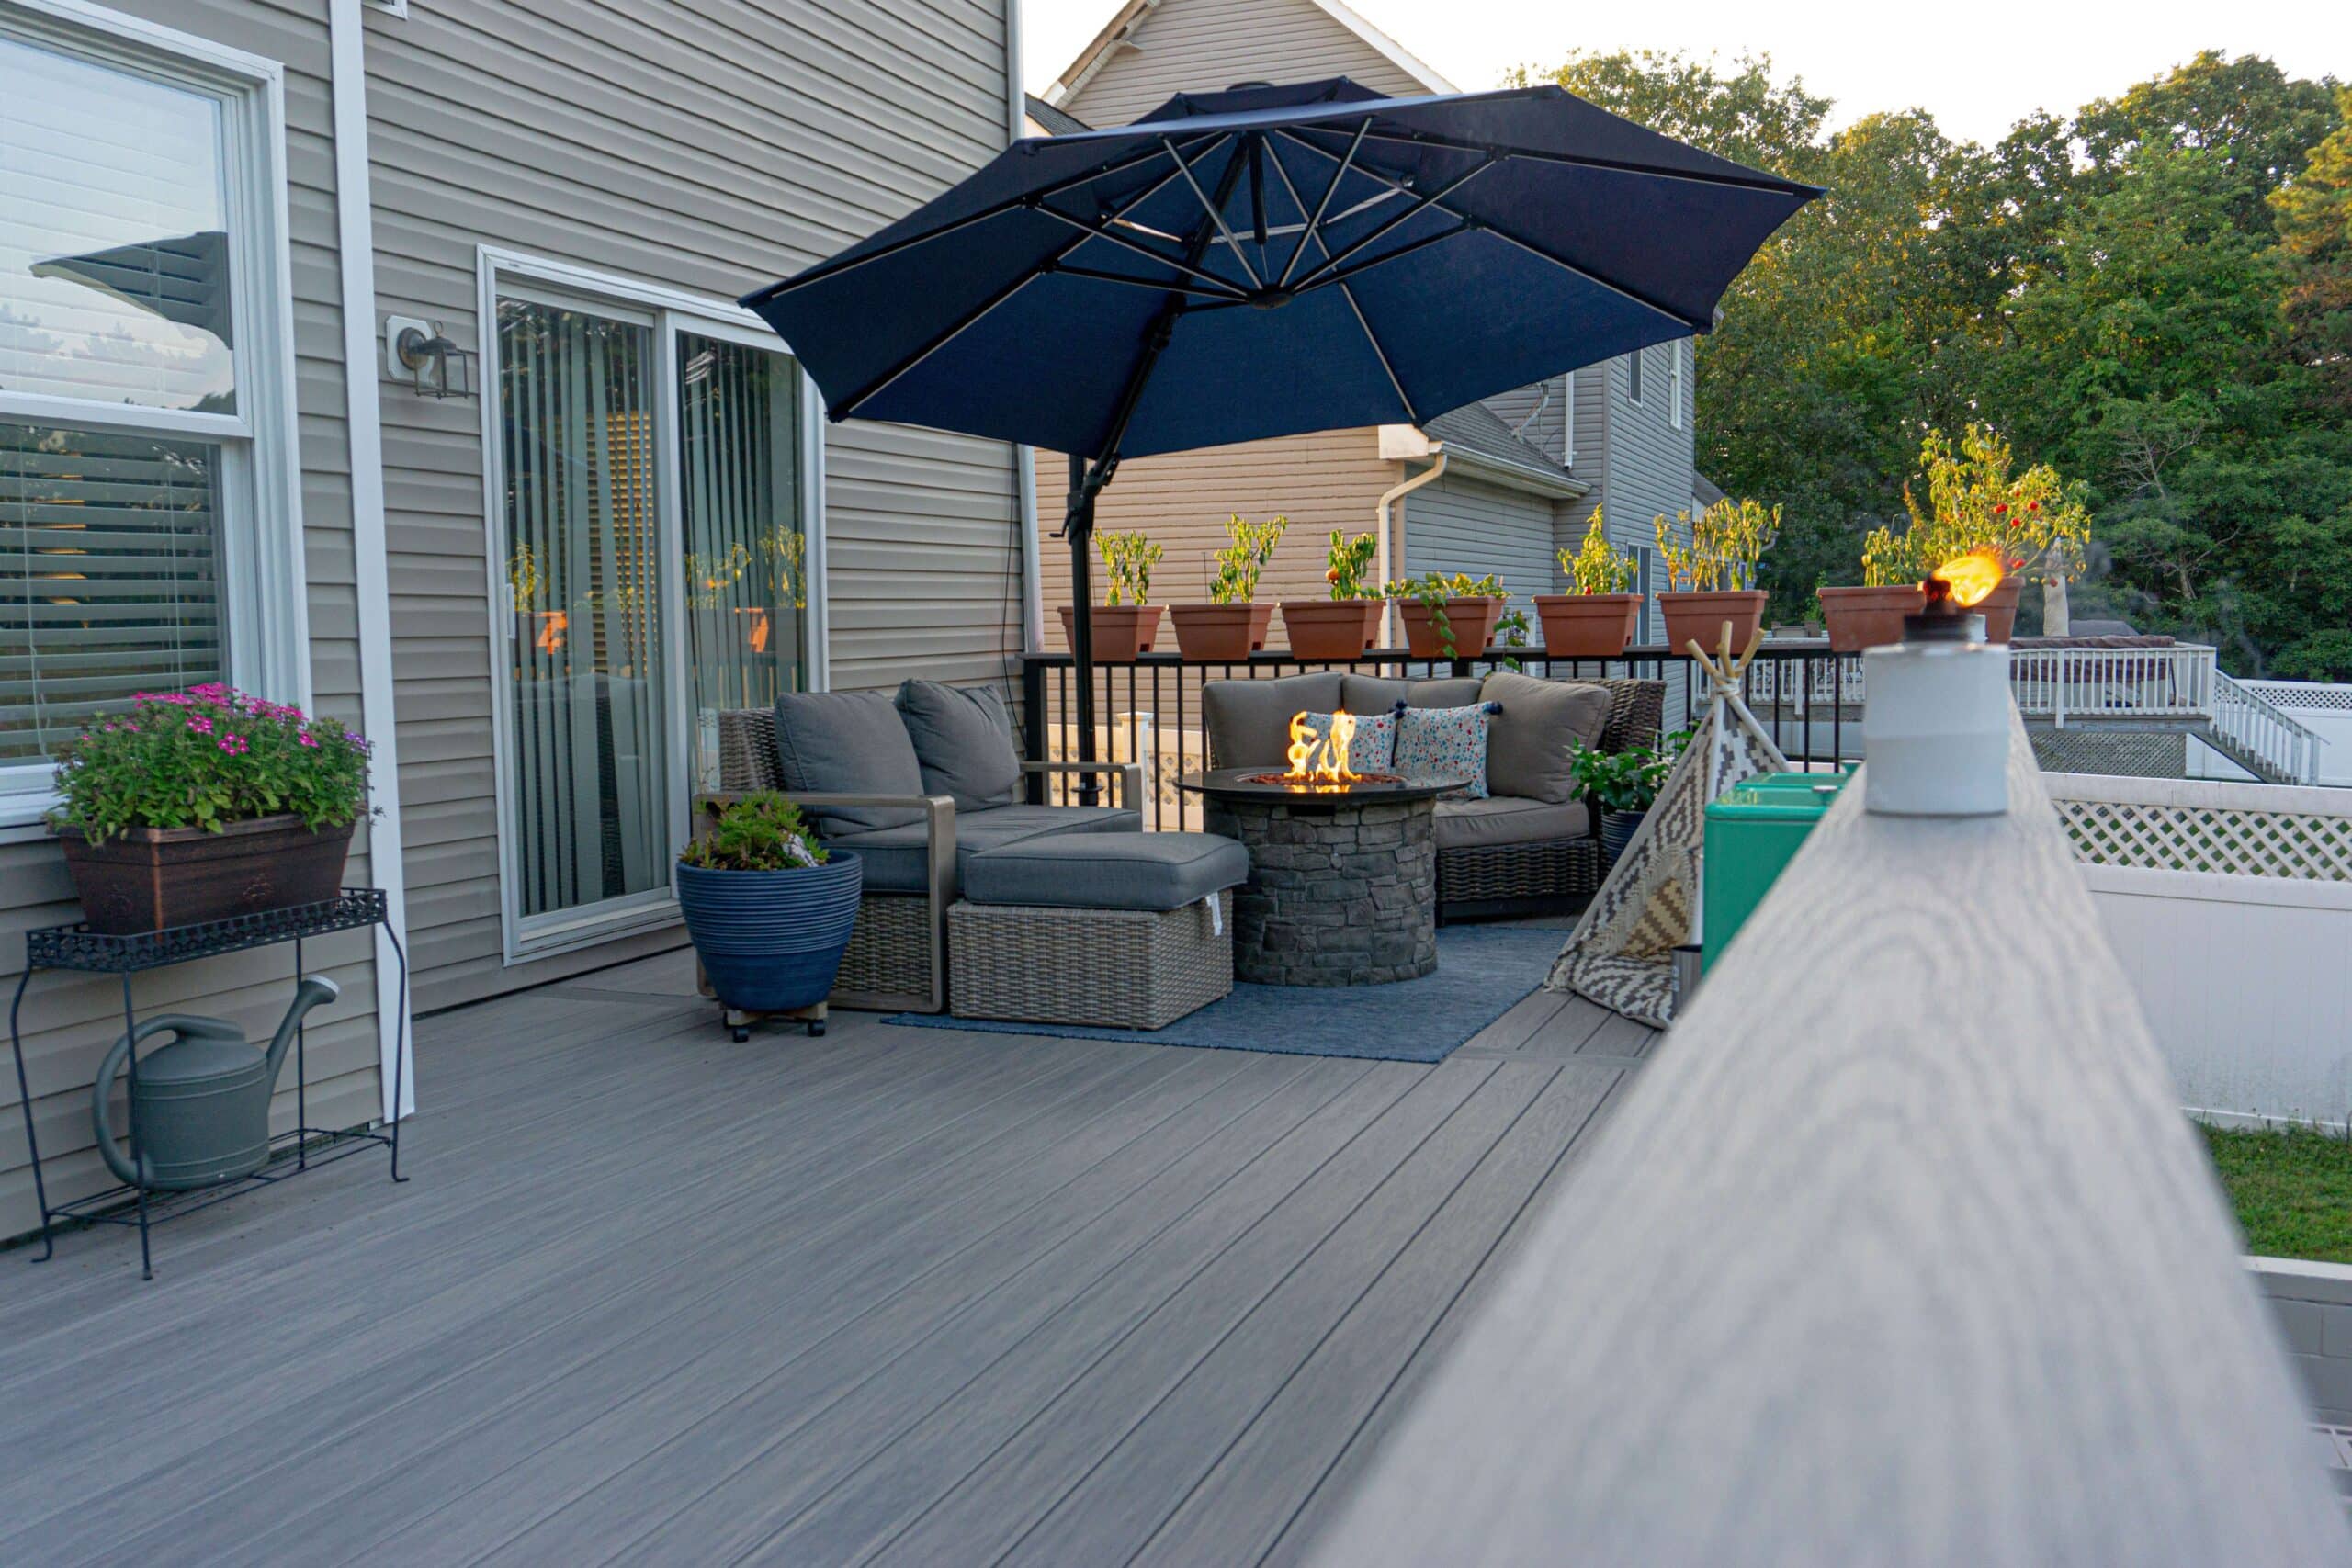 Azek Deck with Aluminum Railing and Drink Rail